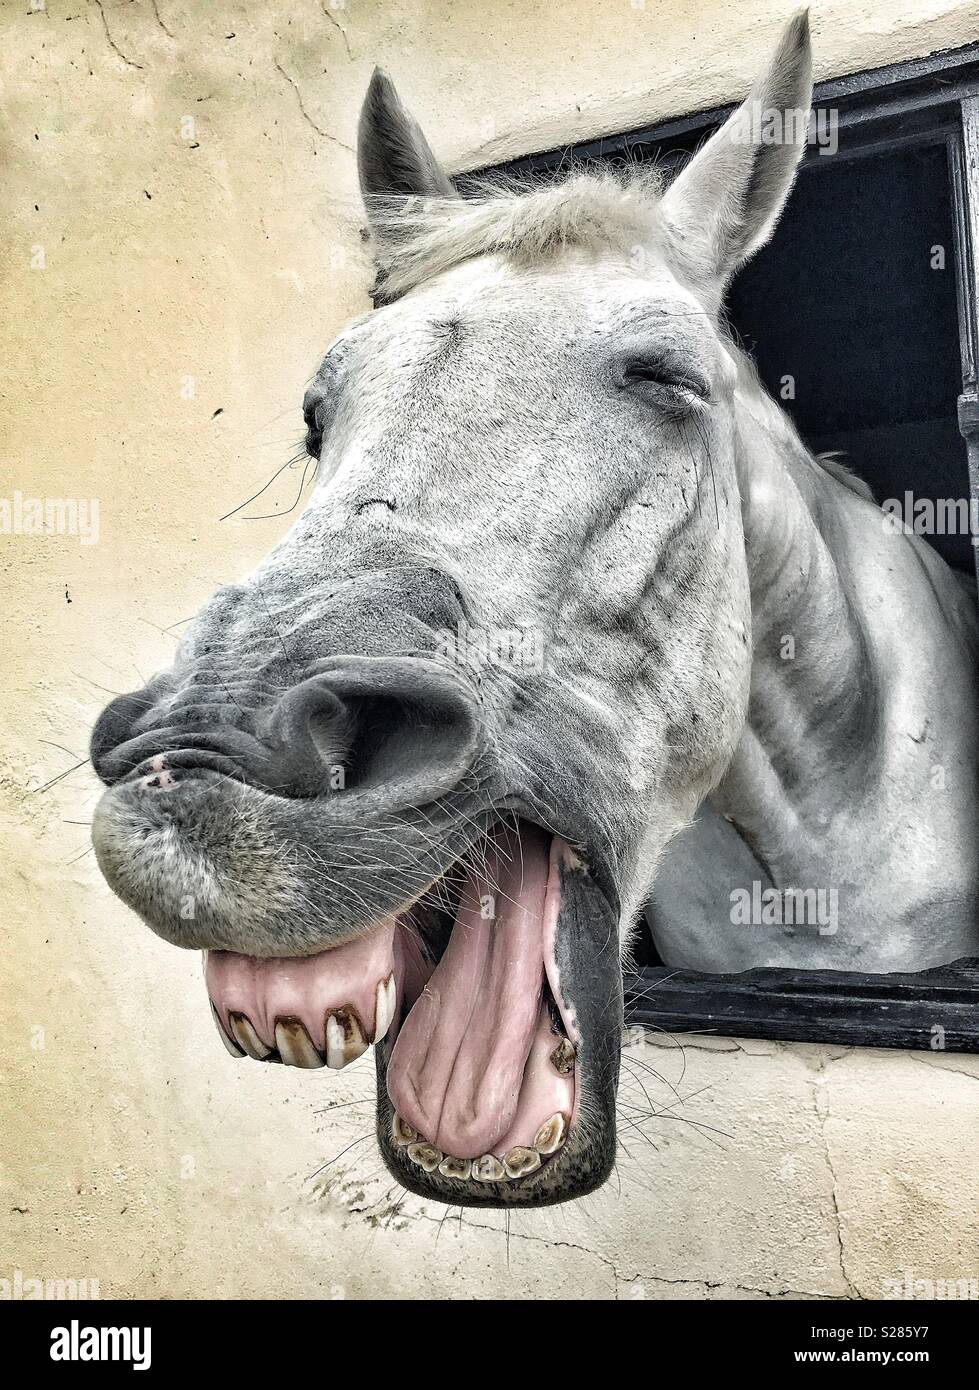 Laughing horse in stable Stock Photo